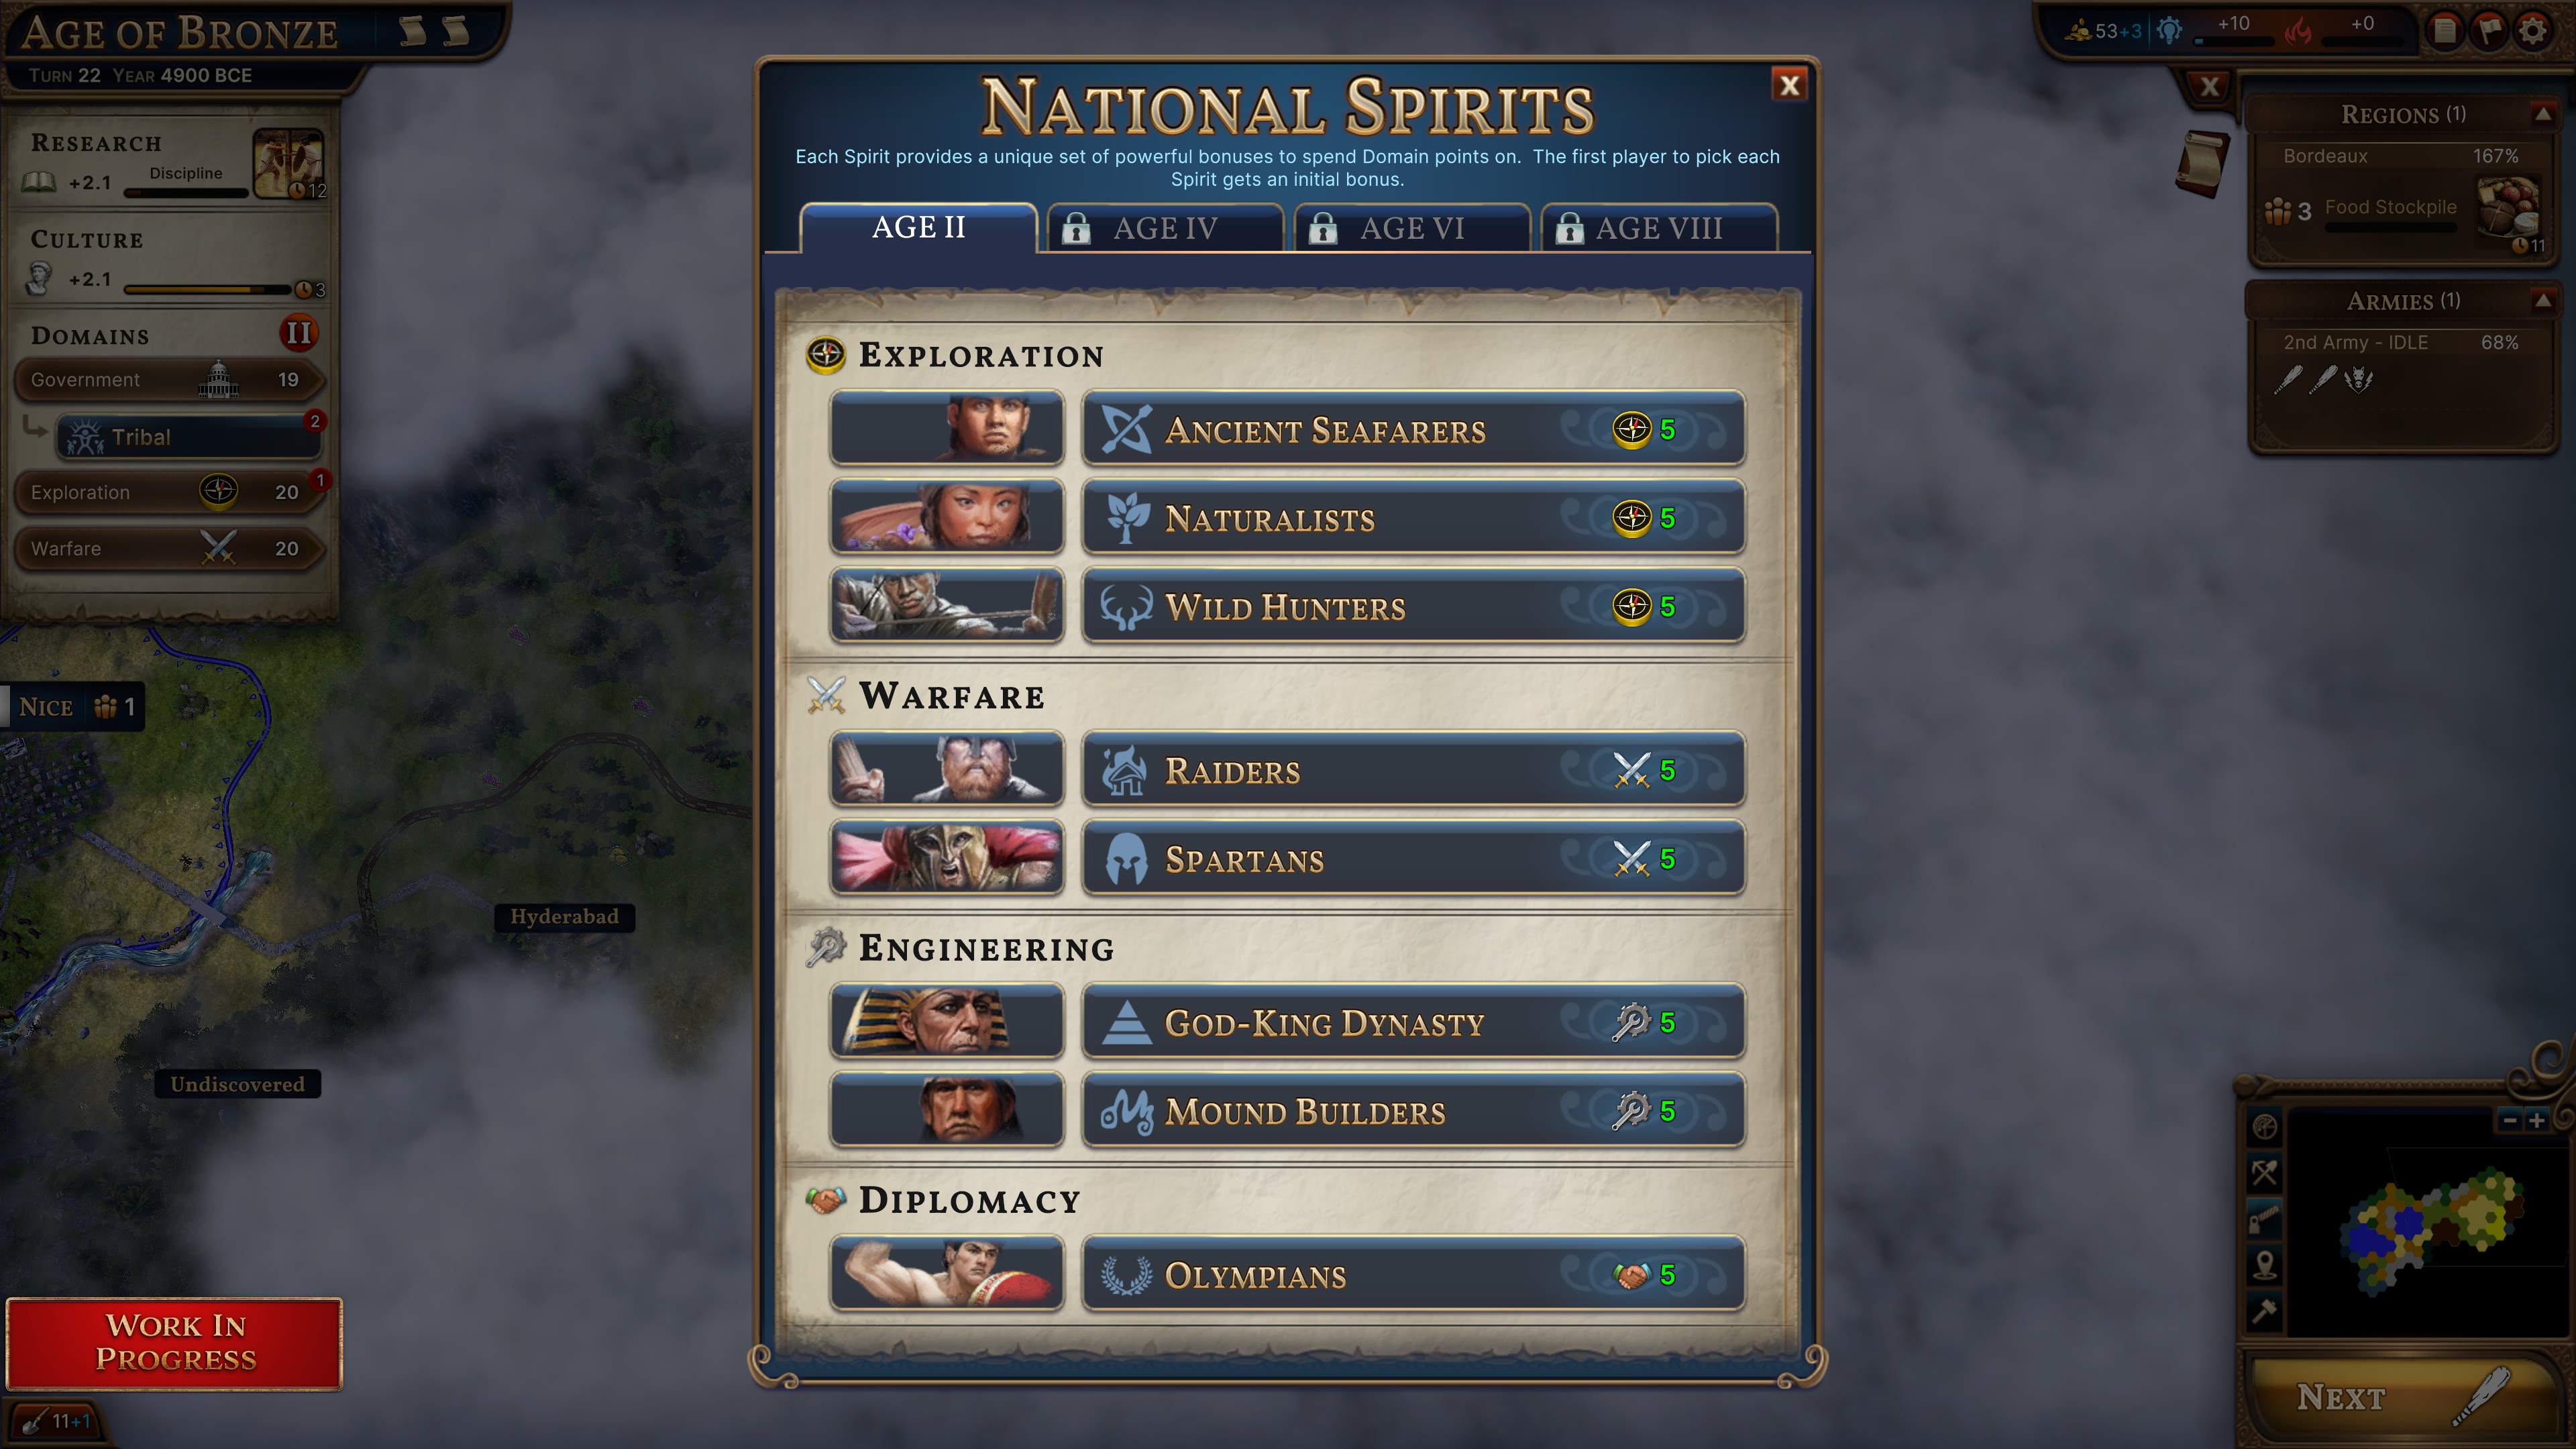 (Using the Nations spirits lets you shape the civilization to your liking.)